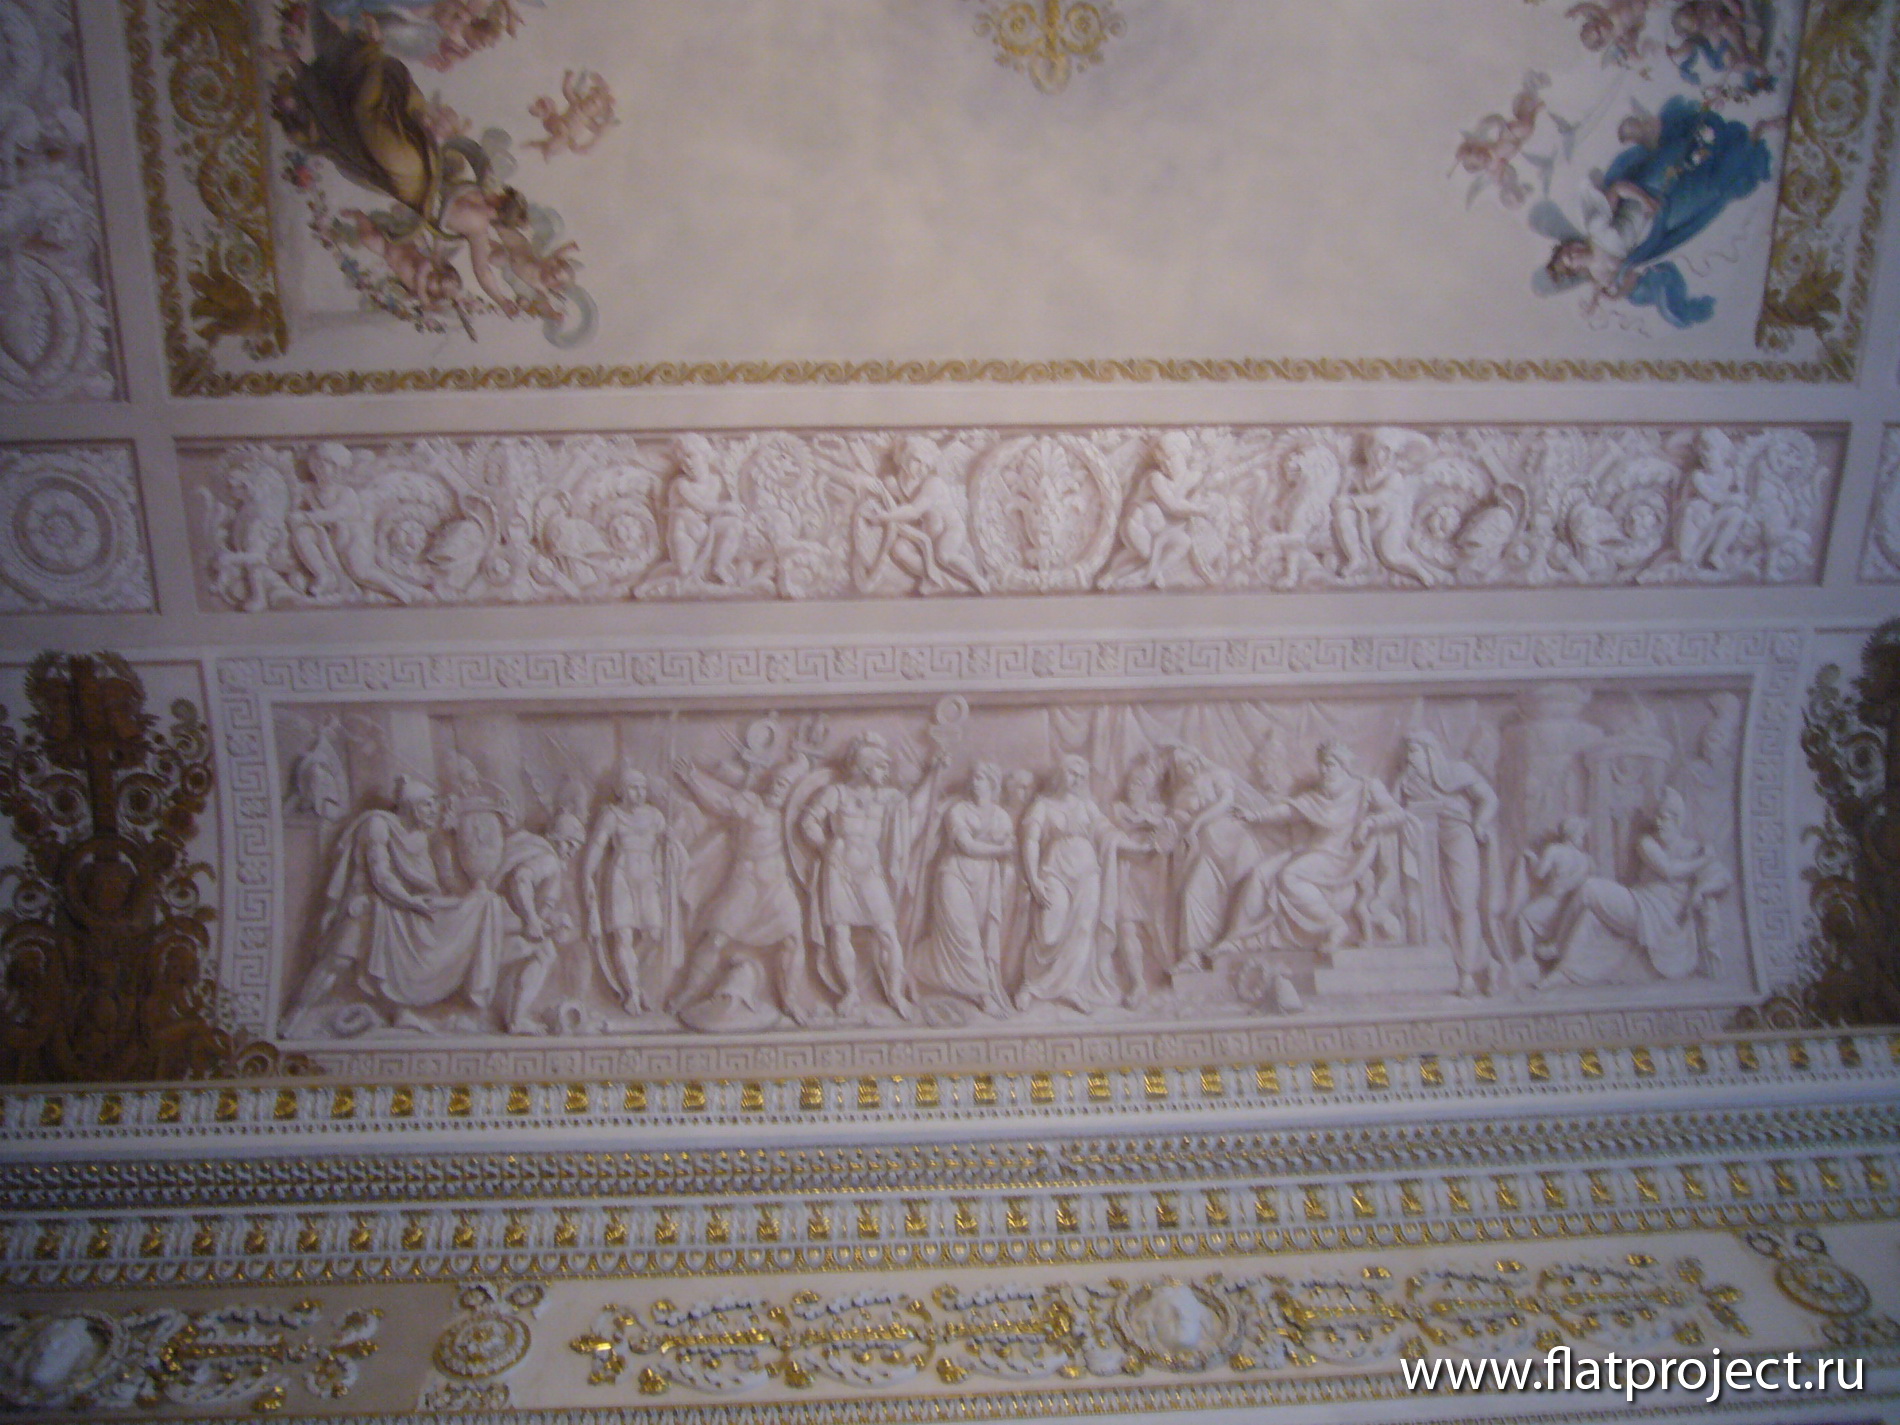 The State Russian museum interiors – photo 120